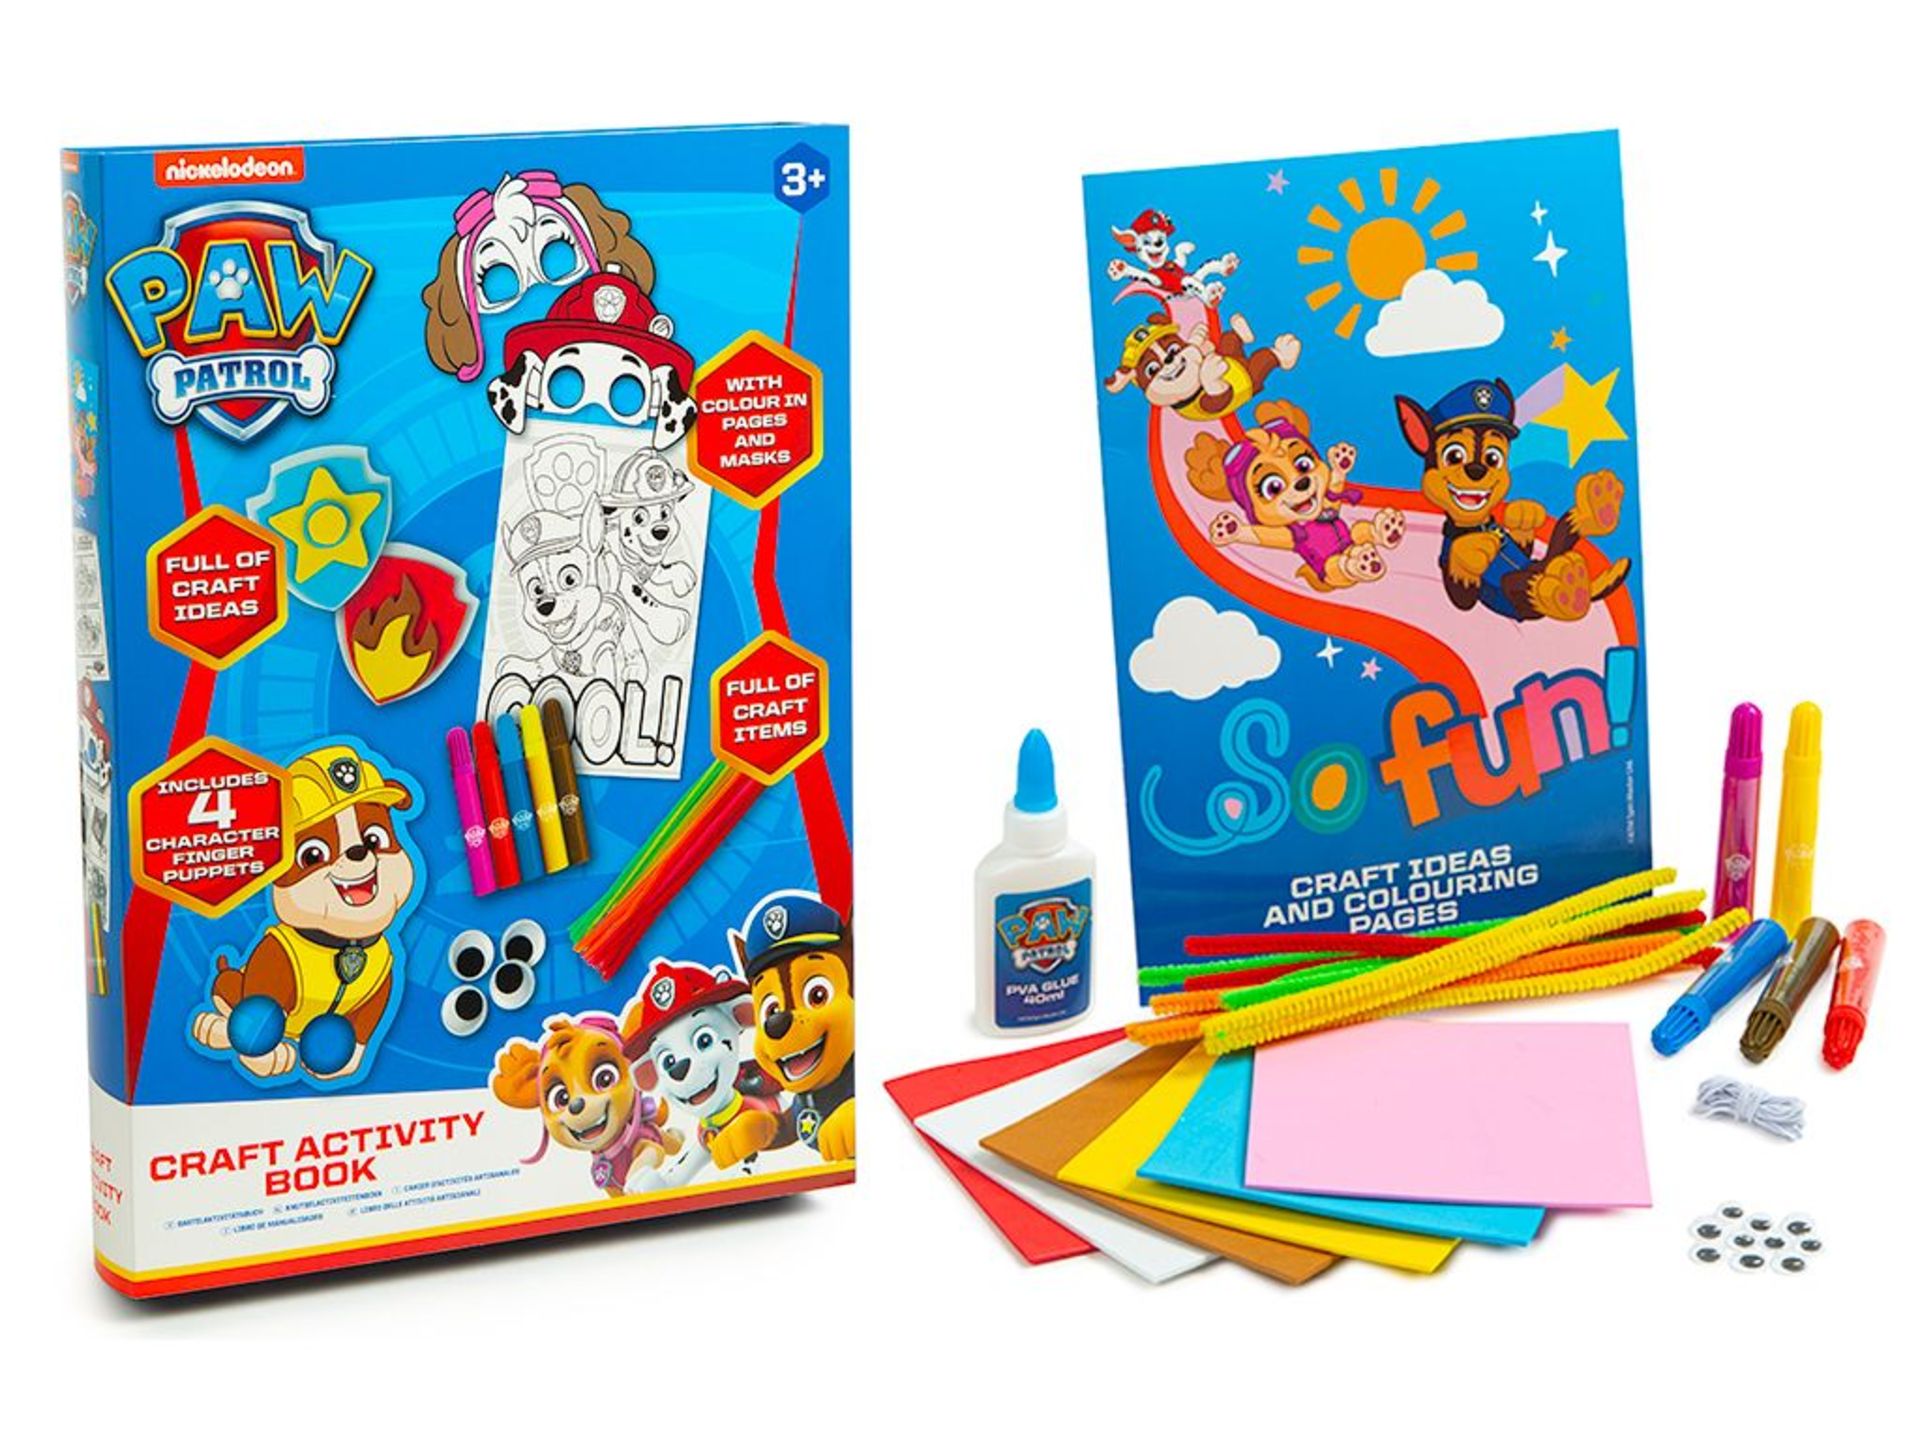 NICKELODEON PAW PATROL CRAFT ACTIVITY BOOK IN CLUDES 4 CHARACTER FINGER PUPPETS, COLOURING PAGES &